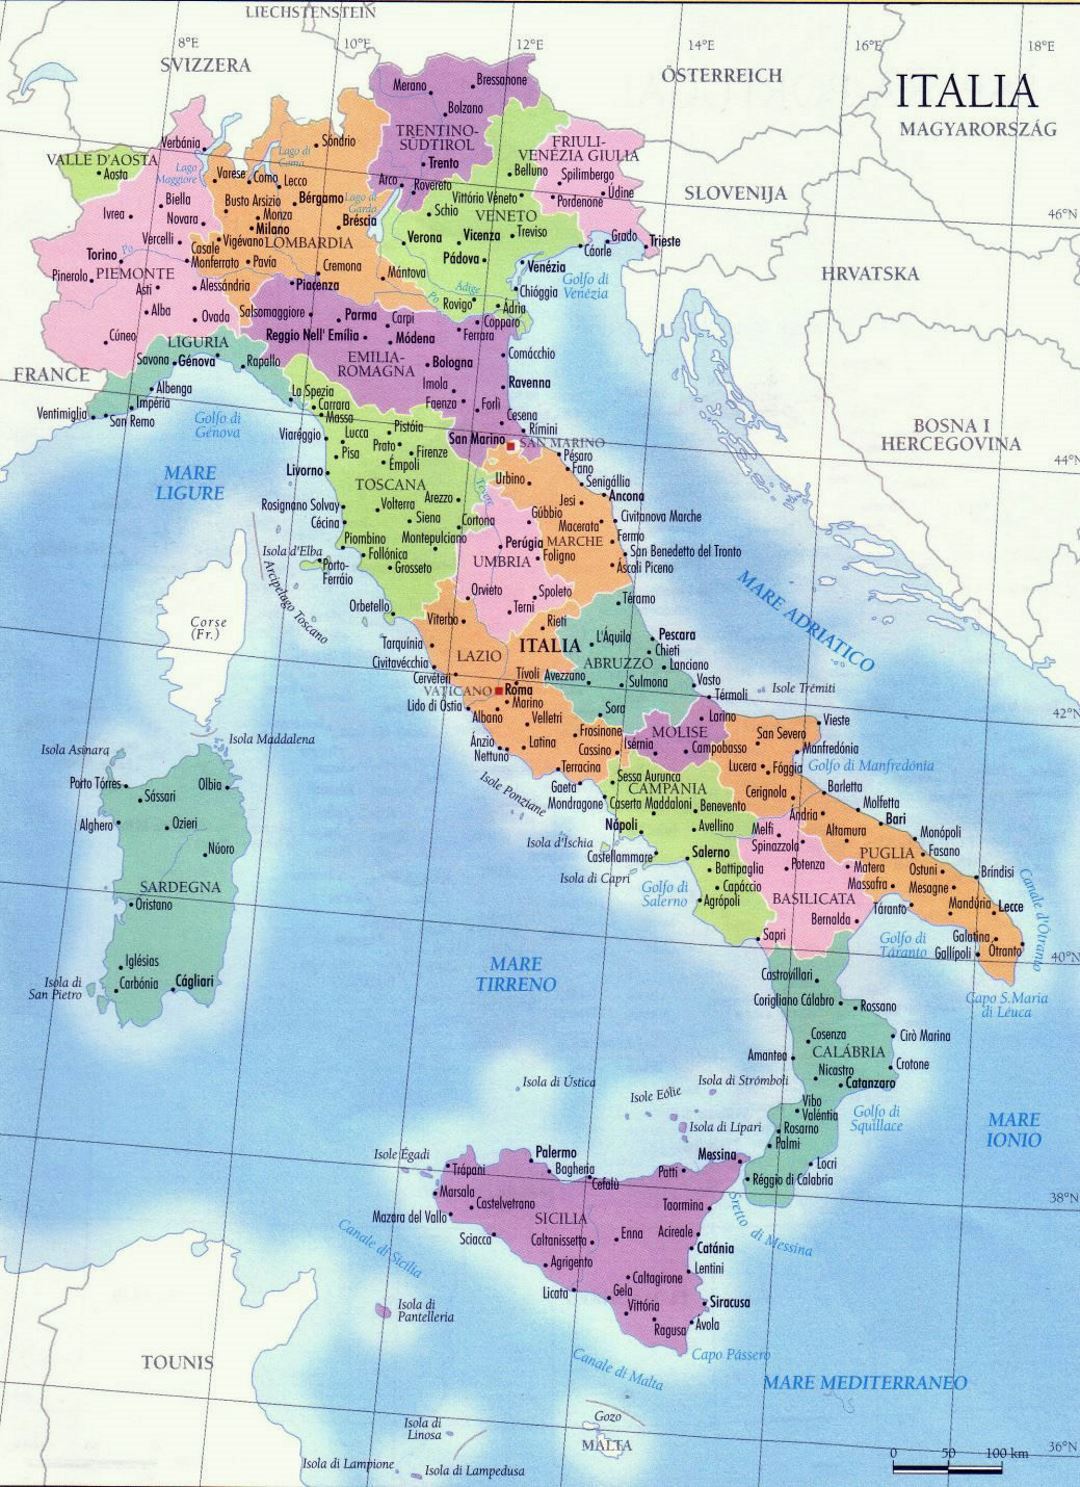 Detailed regions map of Italy with major cities